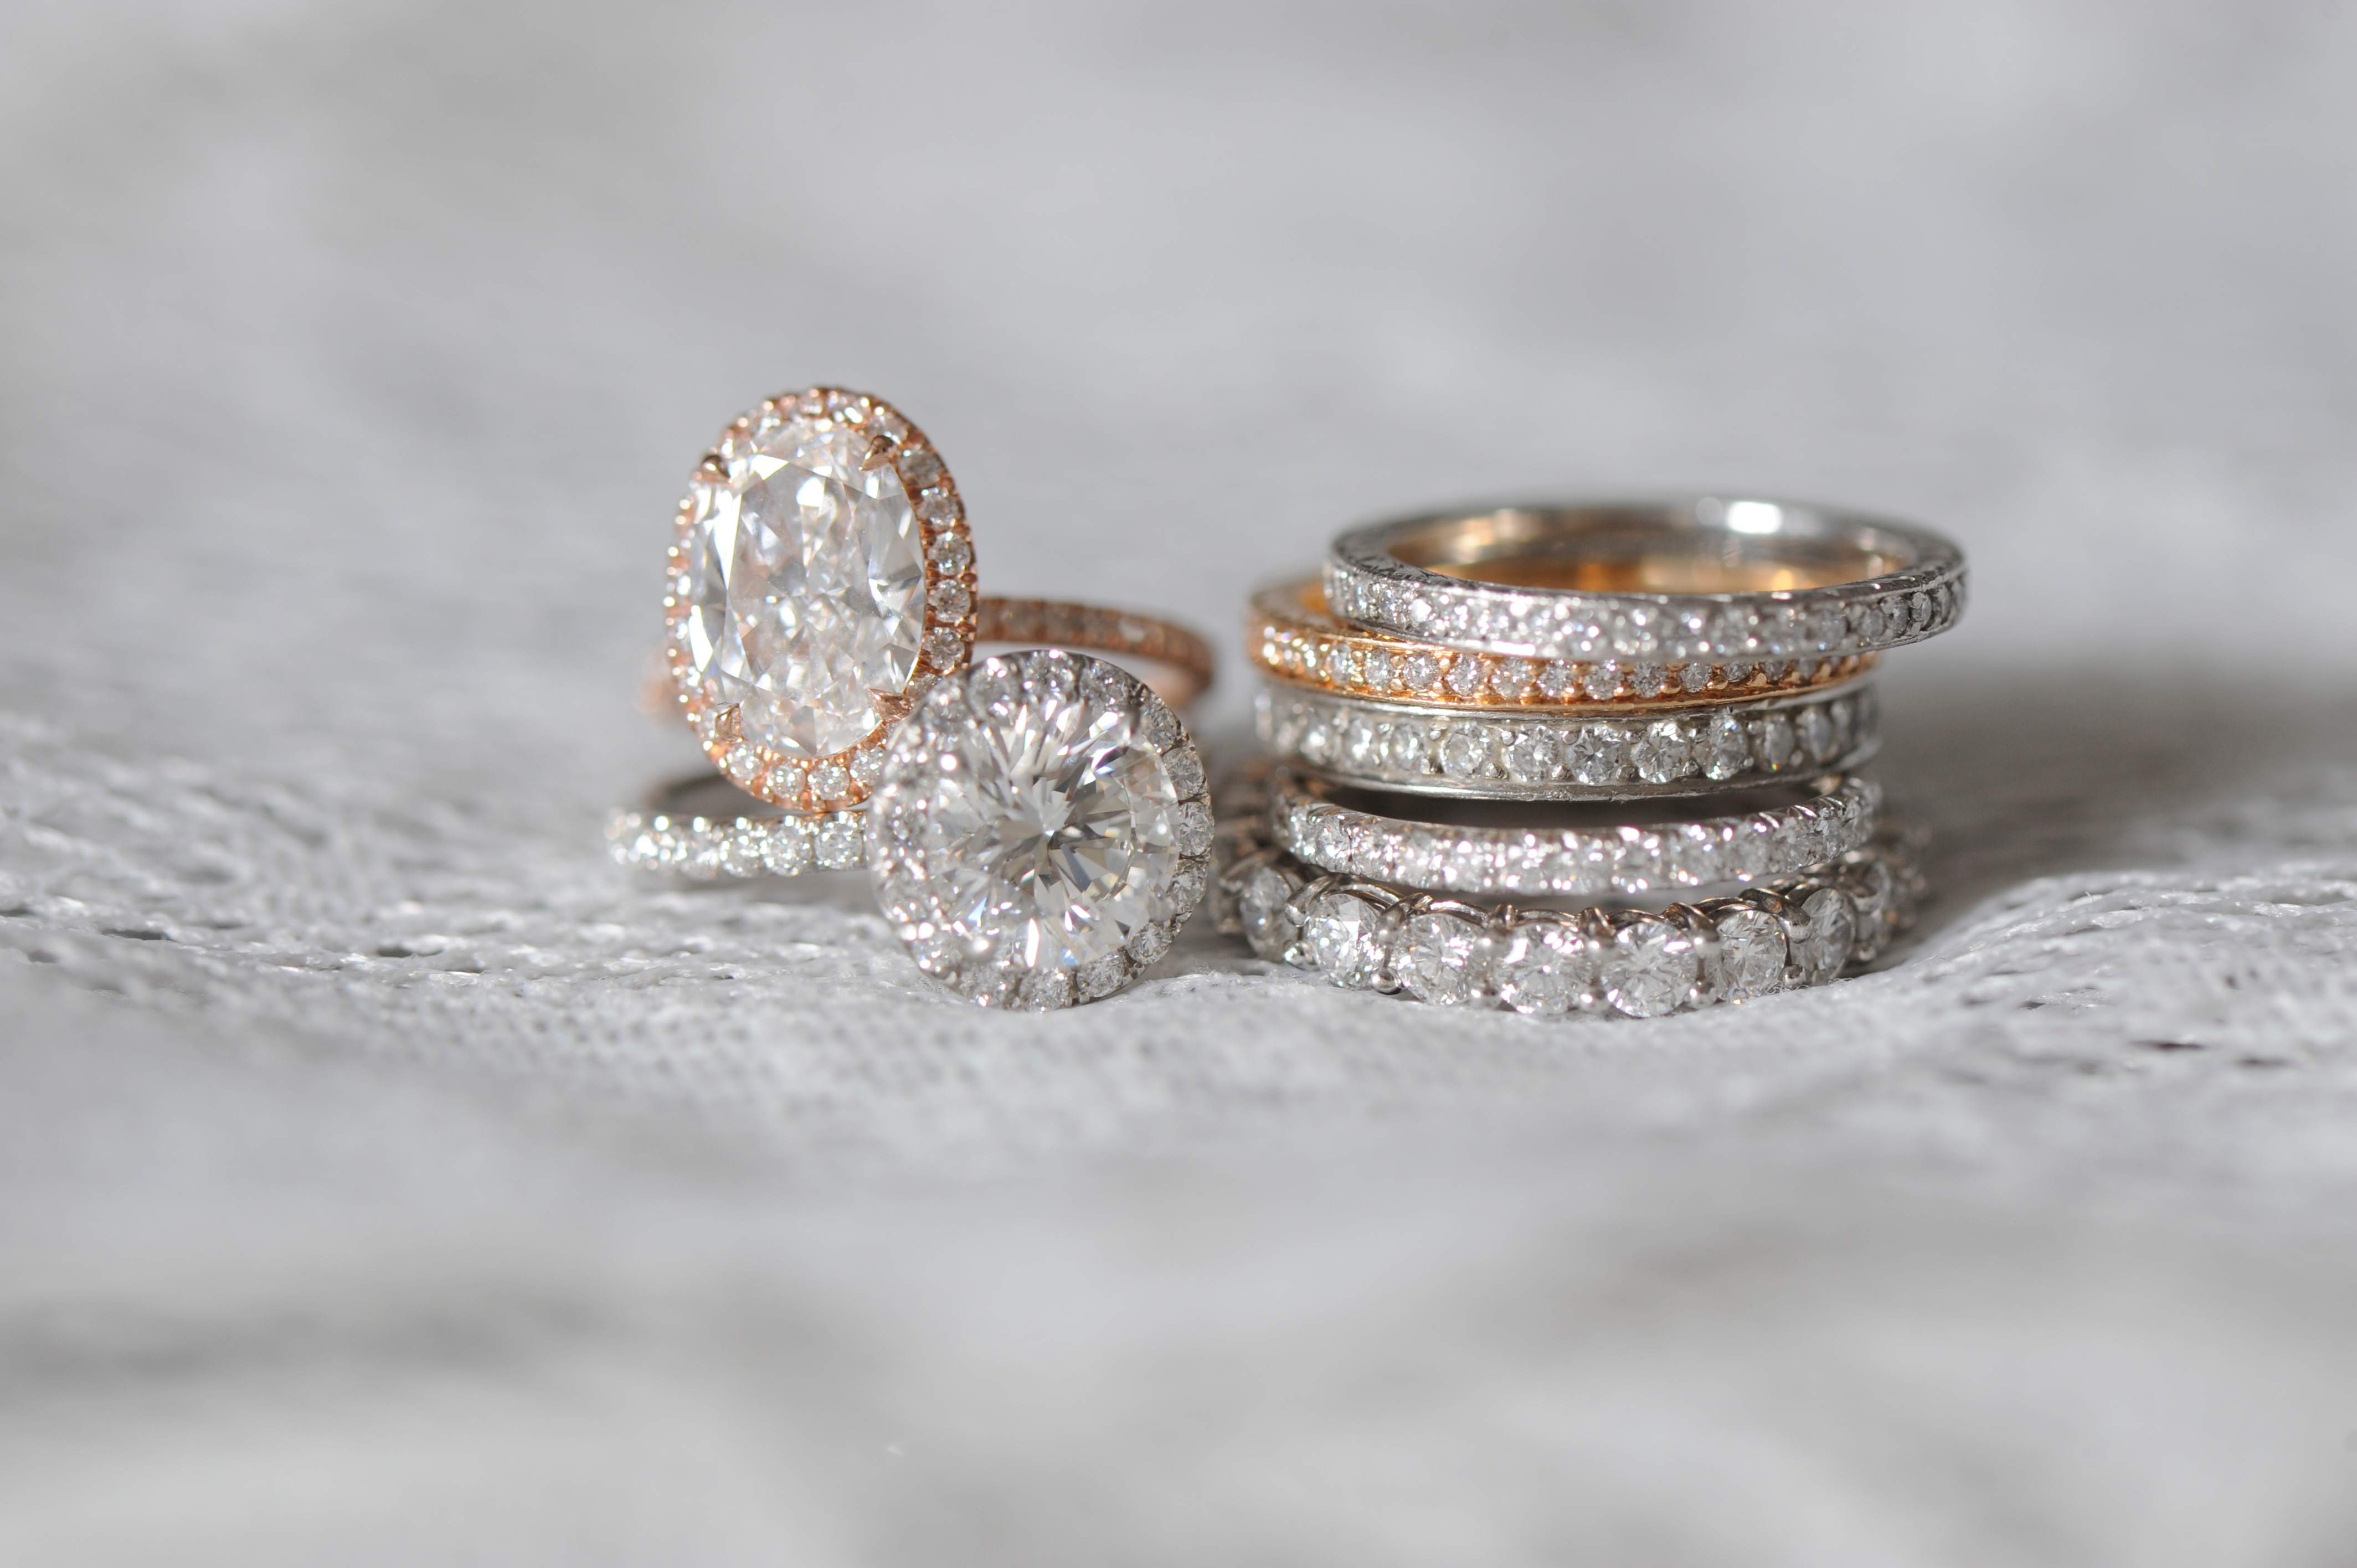 Diamond Halo Engagement Rings and eternity bands